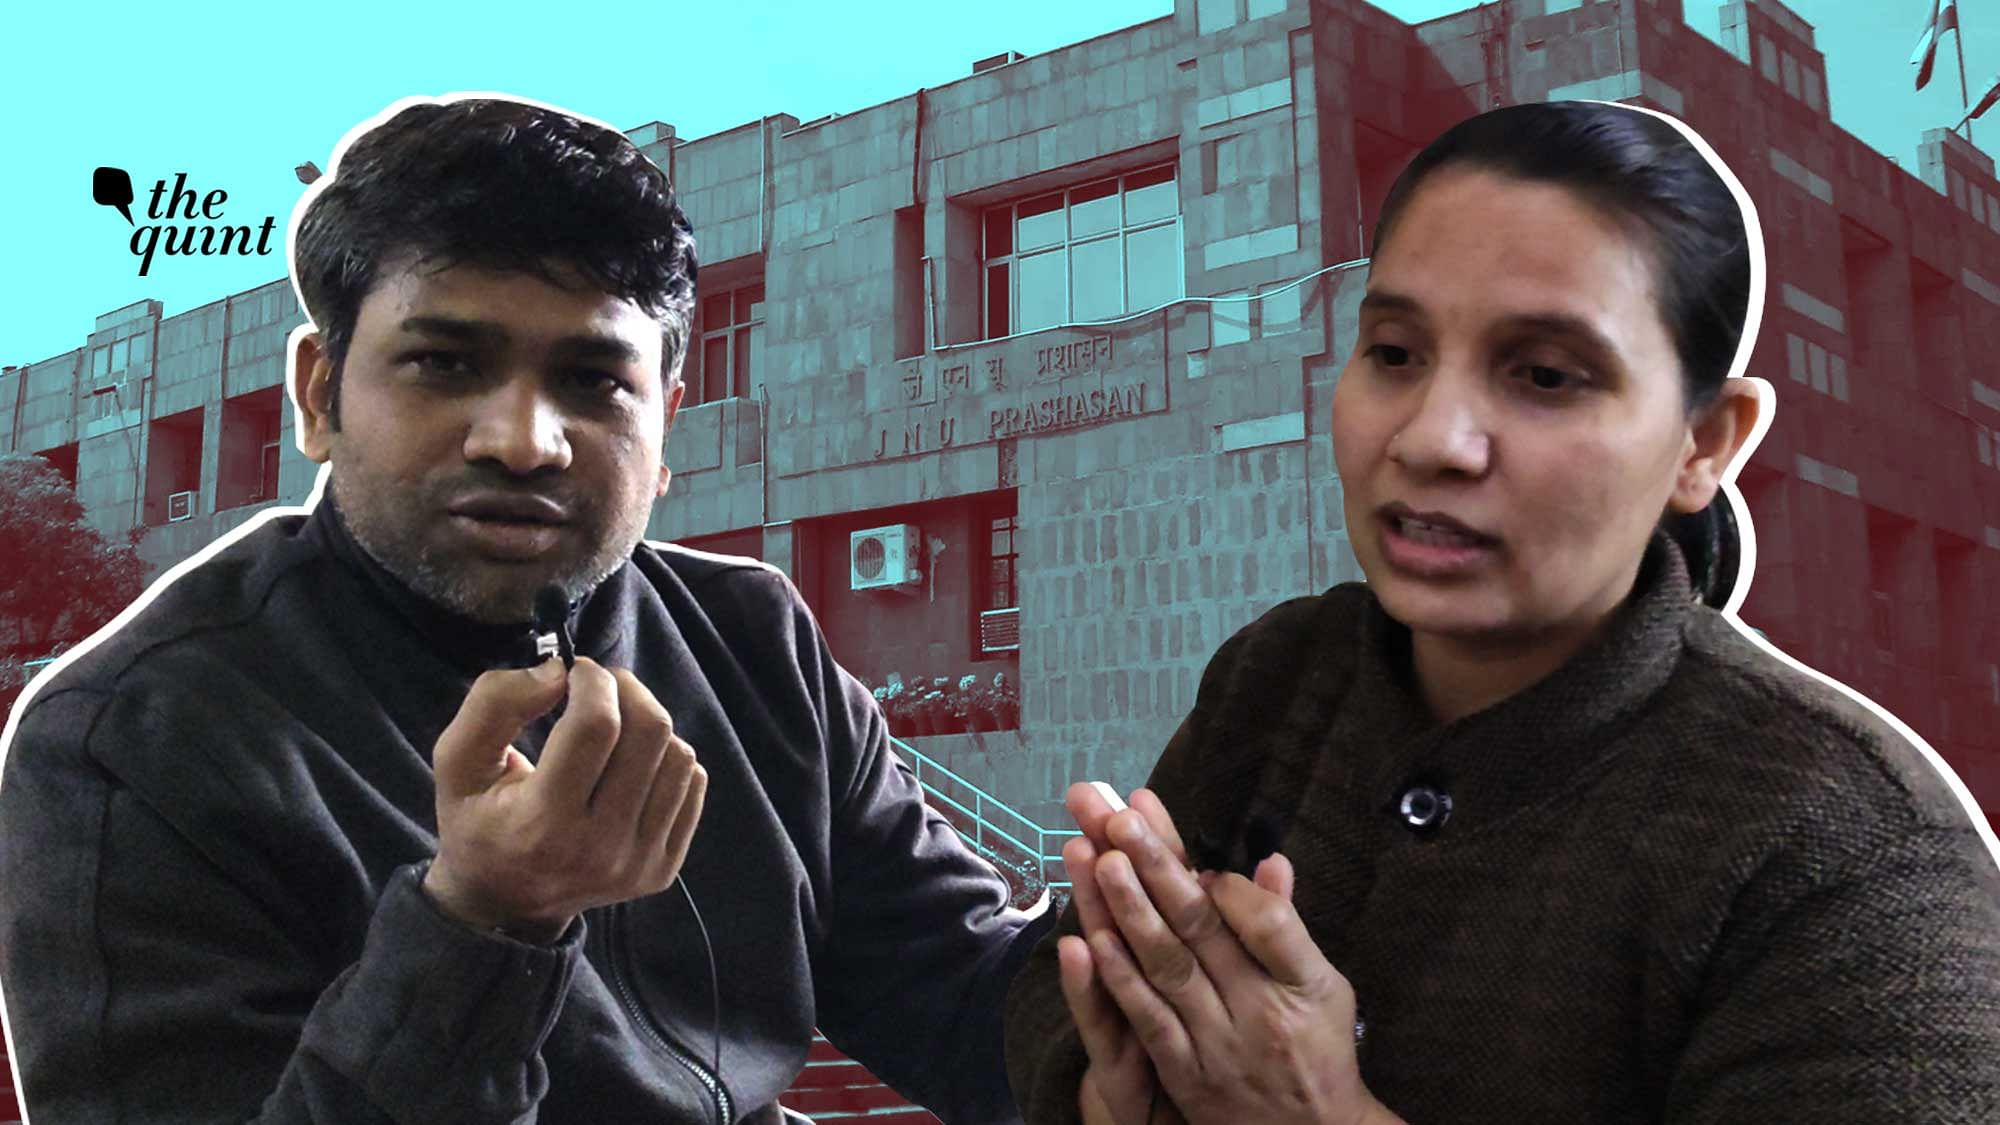 Professor Shiv Prakash, a teacher of Urdu Studies at Jawaharlal University, and his wife recount the horror they underwent on Sunday, 5 January, when a masked mob with rods and sticks broke into the faculty quarters and into their bedroom.&nbsp;